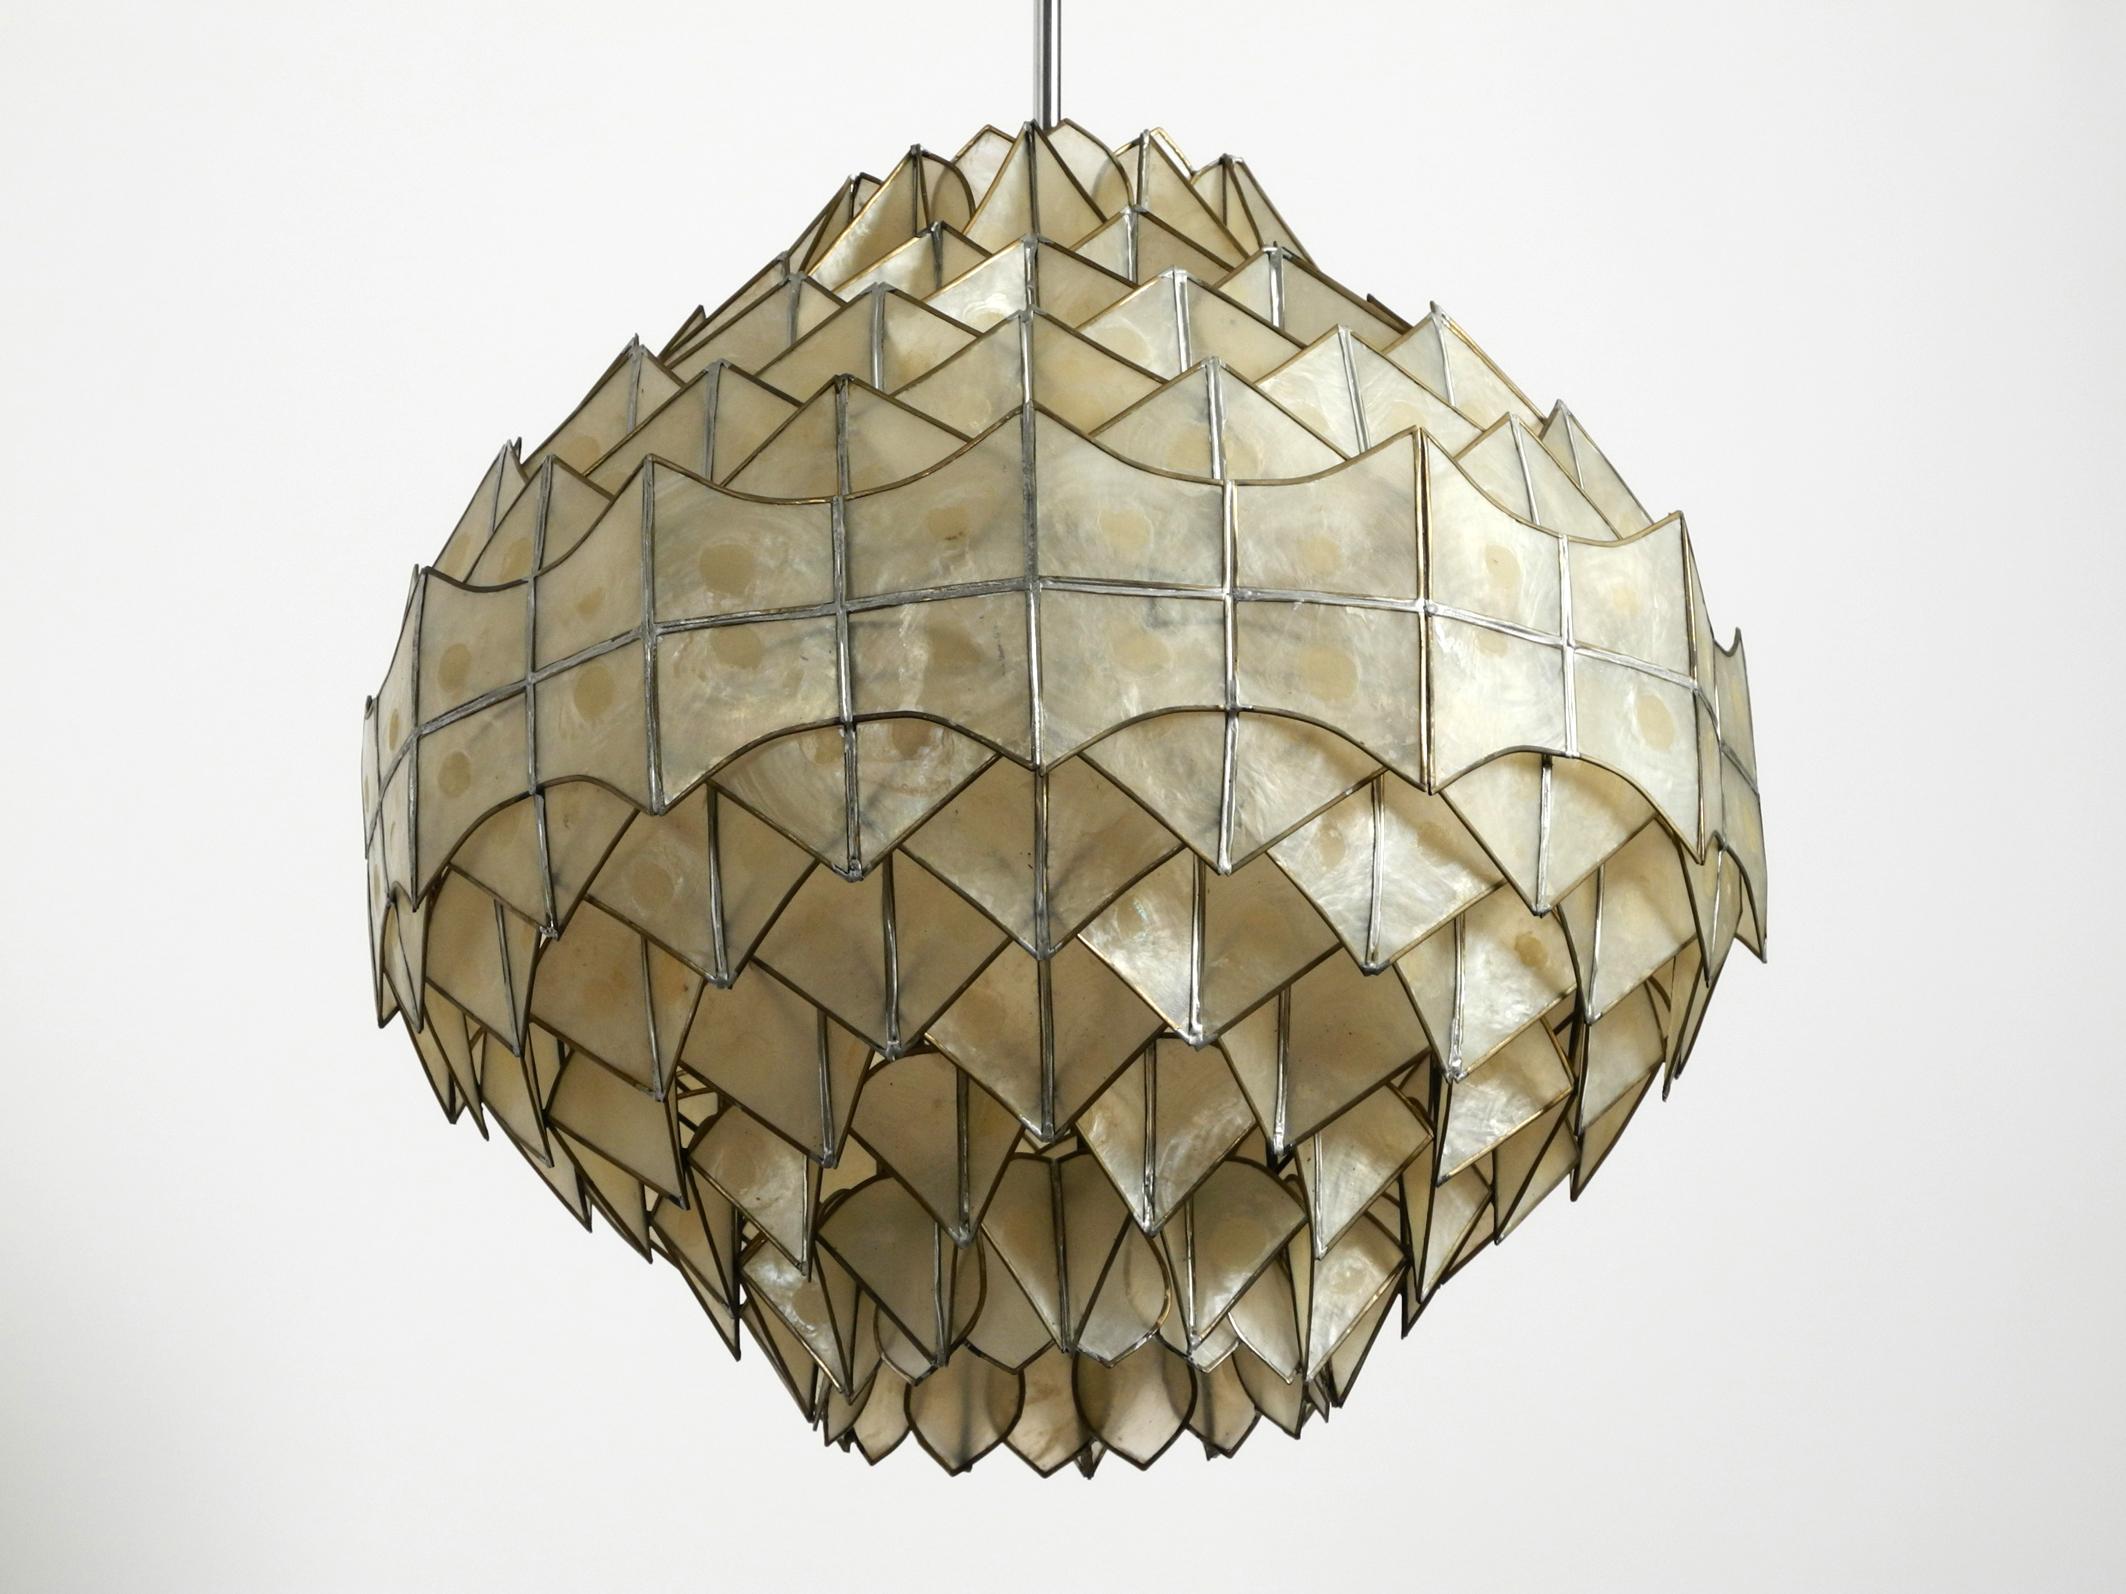 Very elegant stunning beautiful large pendant lamp made of mother of pearl.
Great rare design from the 1970s. Hard to find in this shape and condition
Very high quality workmanship. Metal frame, chrome-plated rod and chrome-plated canopy. Pleasant